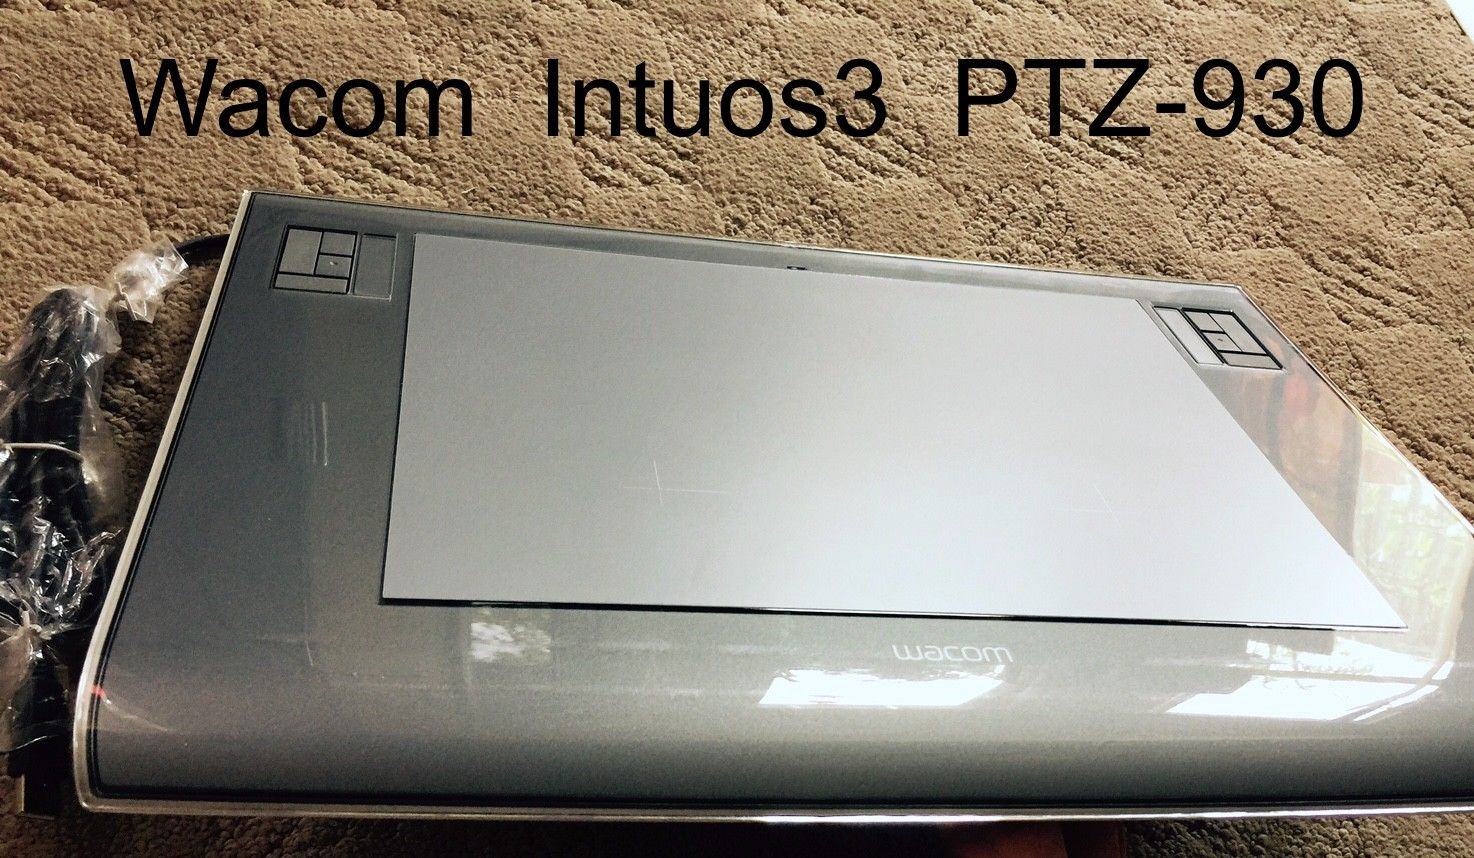 Wacom INTUOS3 9x12 Graphics tablet PTZ-930 LARGE for all Macs Windows